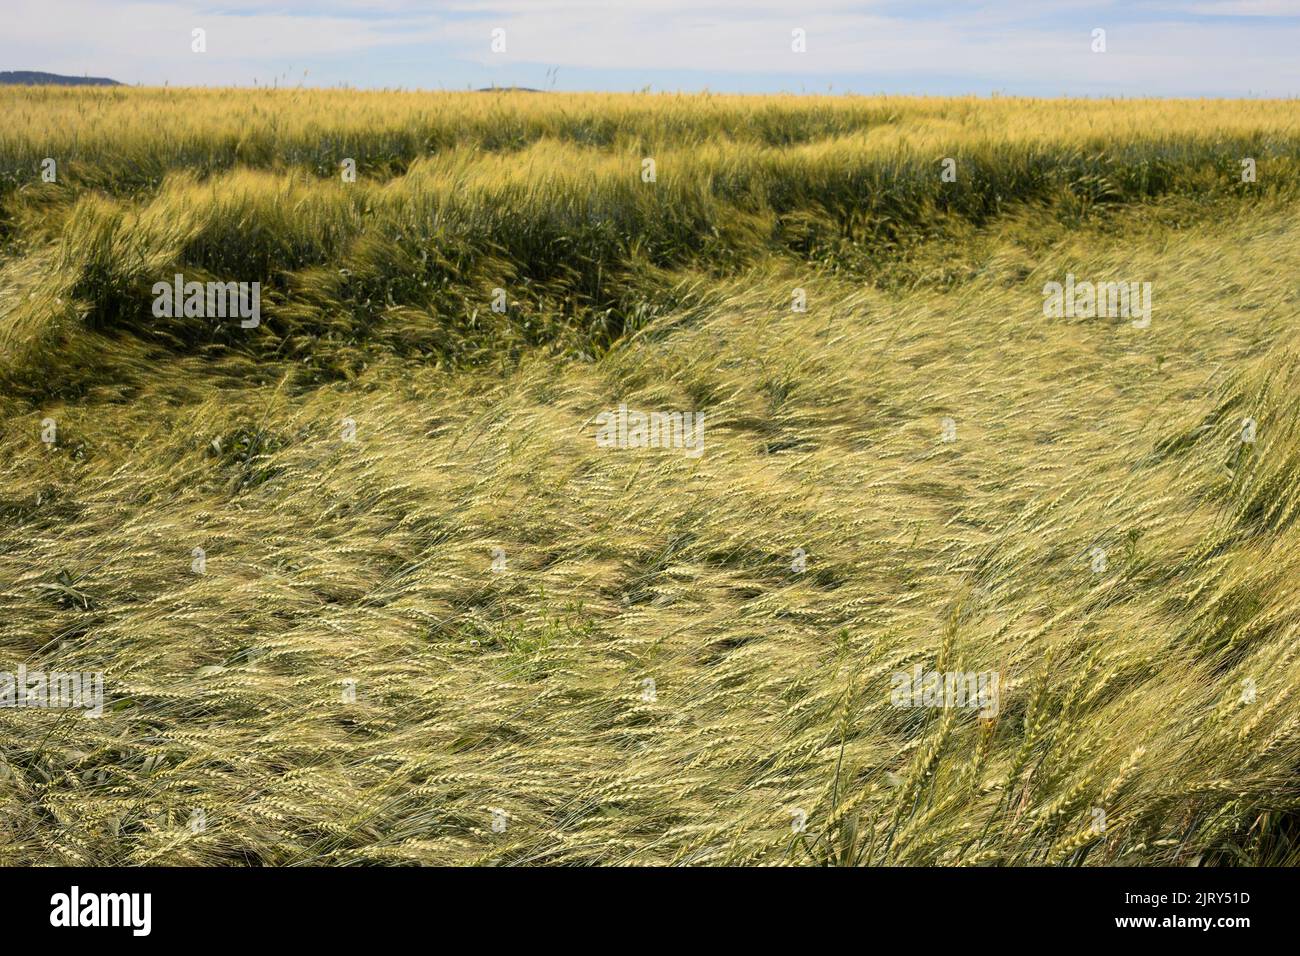 A wheat crop flattened by a rain storm and hail damage on a Canadian prairie farm field in summer, central Alberta. The crop is still harvestable. Stock Photo